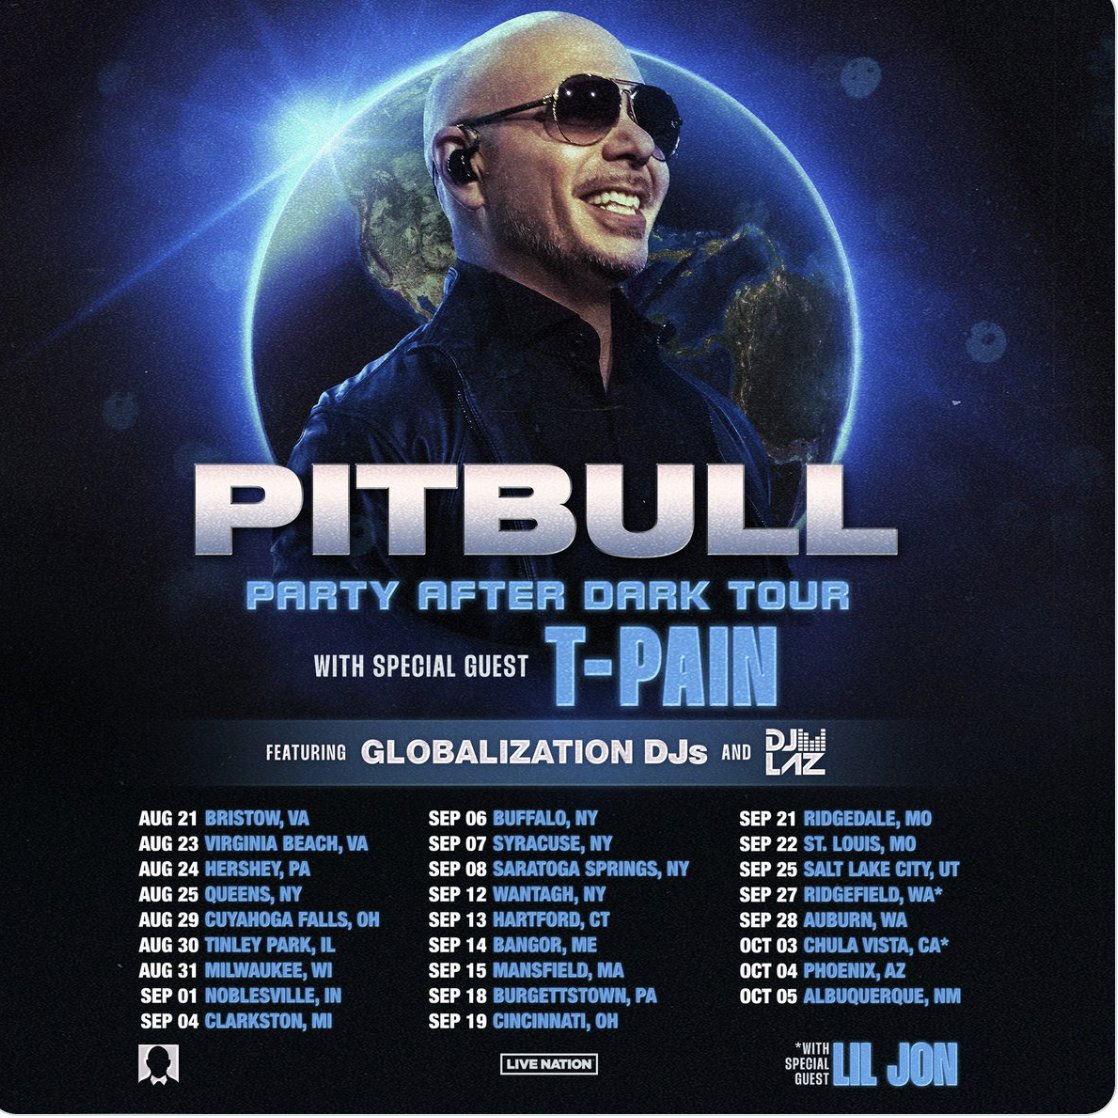 #teampitbull Where will you be seeing @pitbull
on his #PartyAfterDarkTour w/ special guest
@TPAIN and * @LilJon only on selected dates*  
@siriusxmpitbull @Mr305_Inc @LiveNation